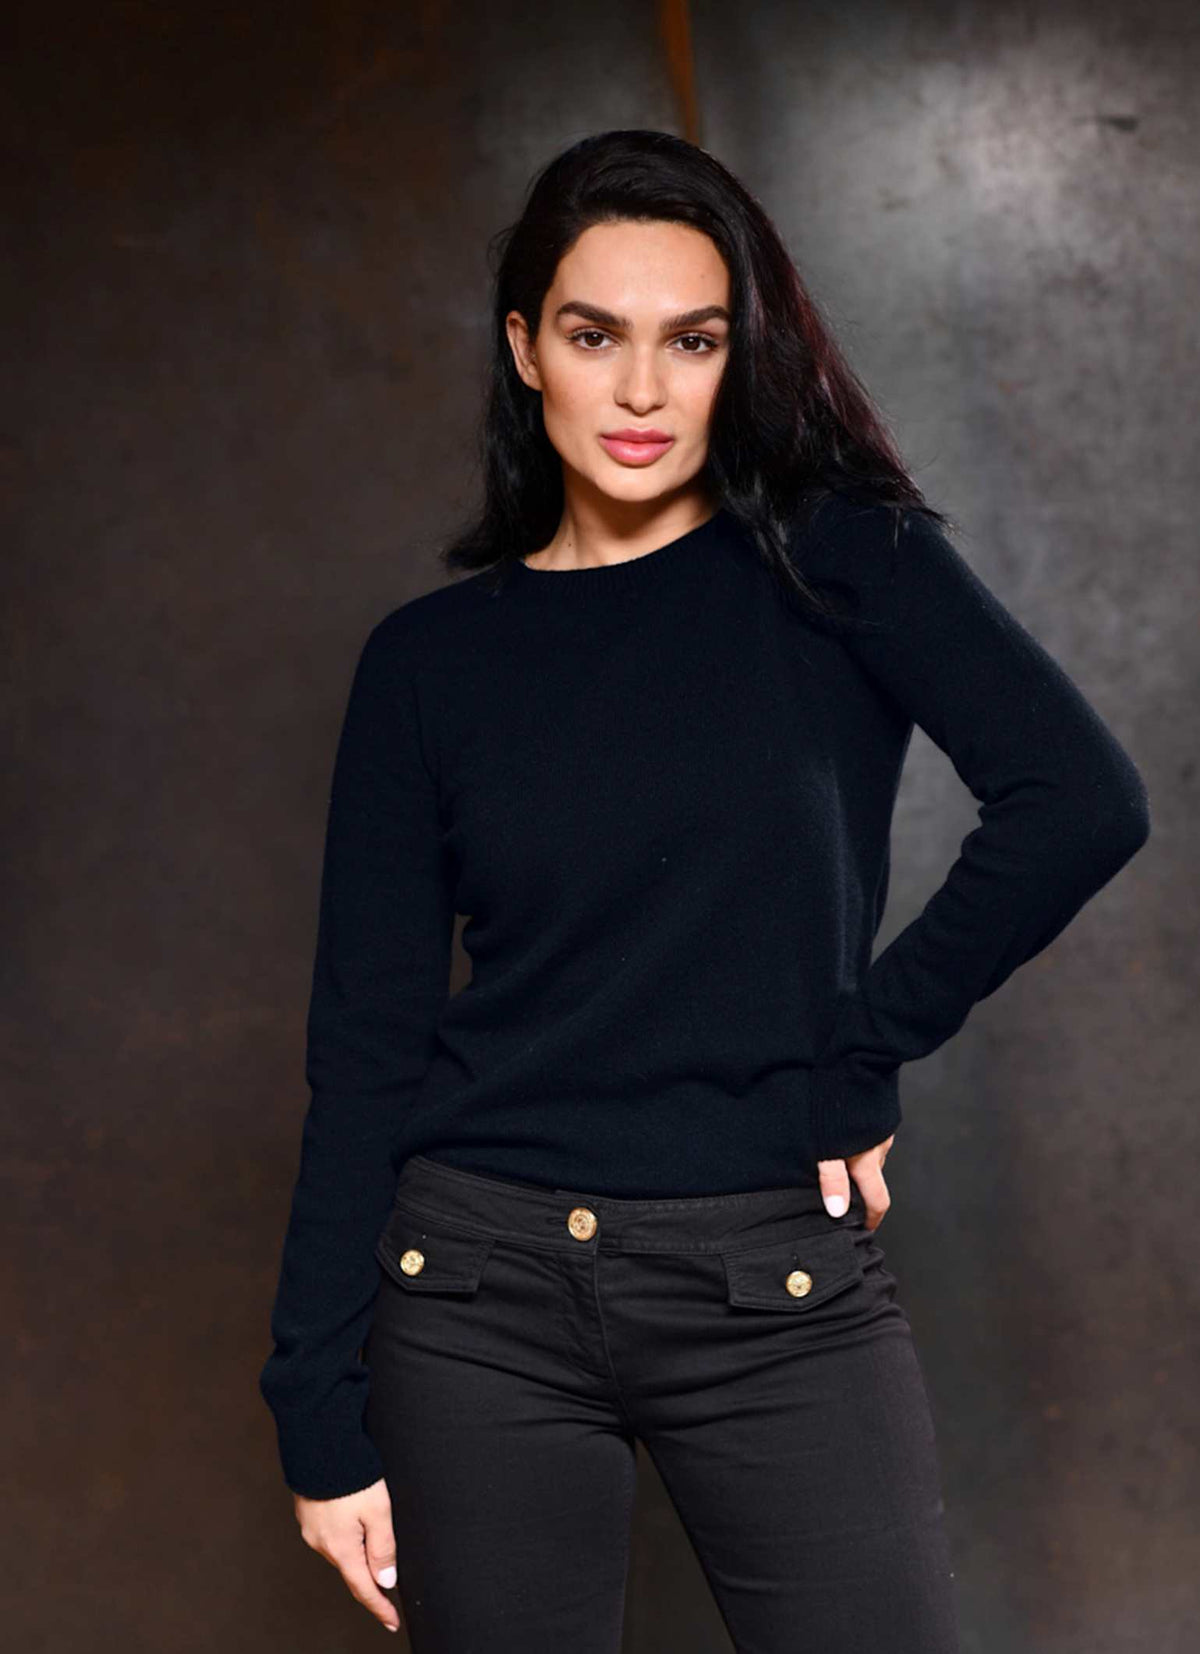 Women wearing Cortina 100% pure cashmere sweater in color navy blue